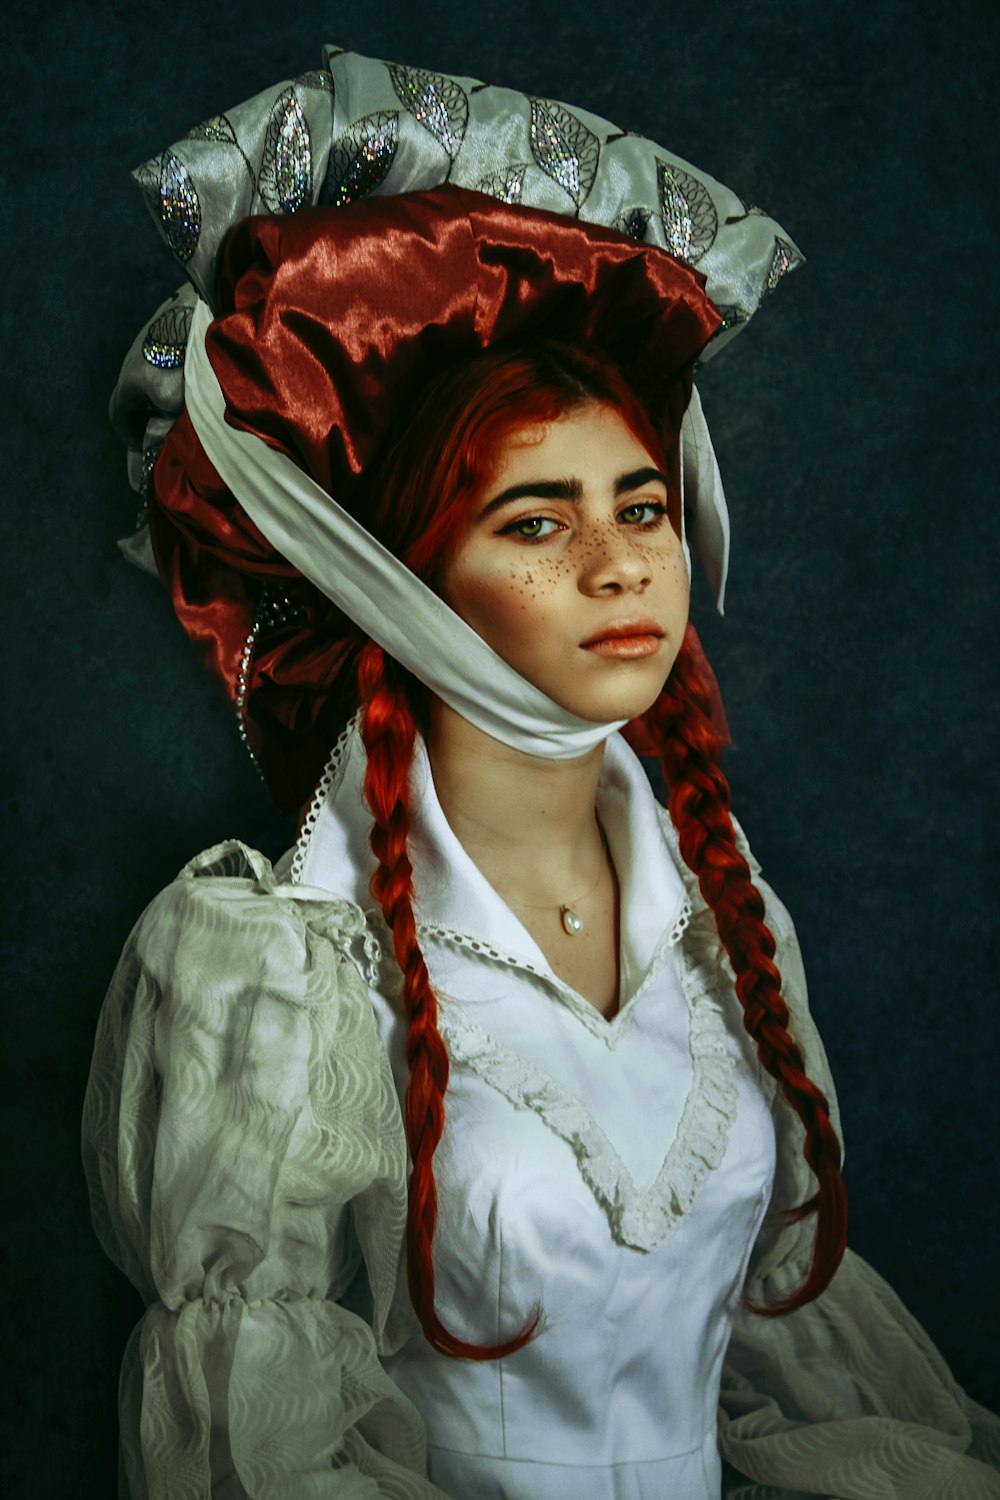 a woman with red hair wearing a white dress and a red hat